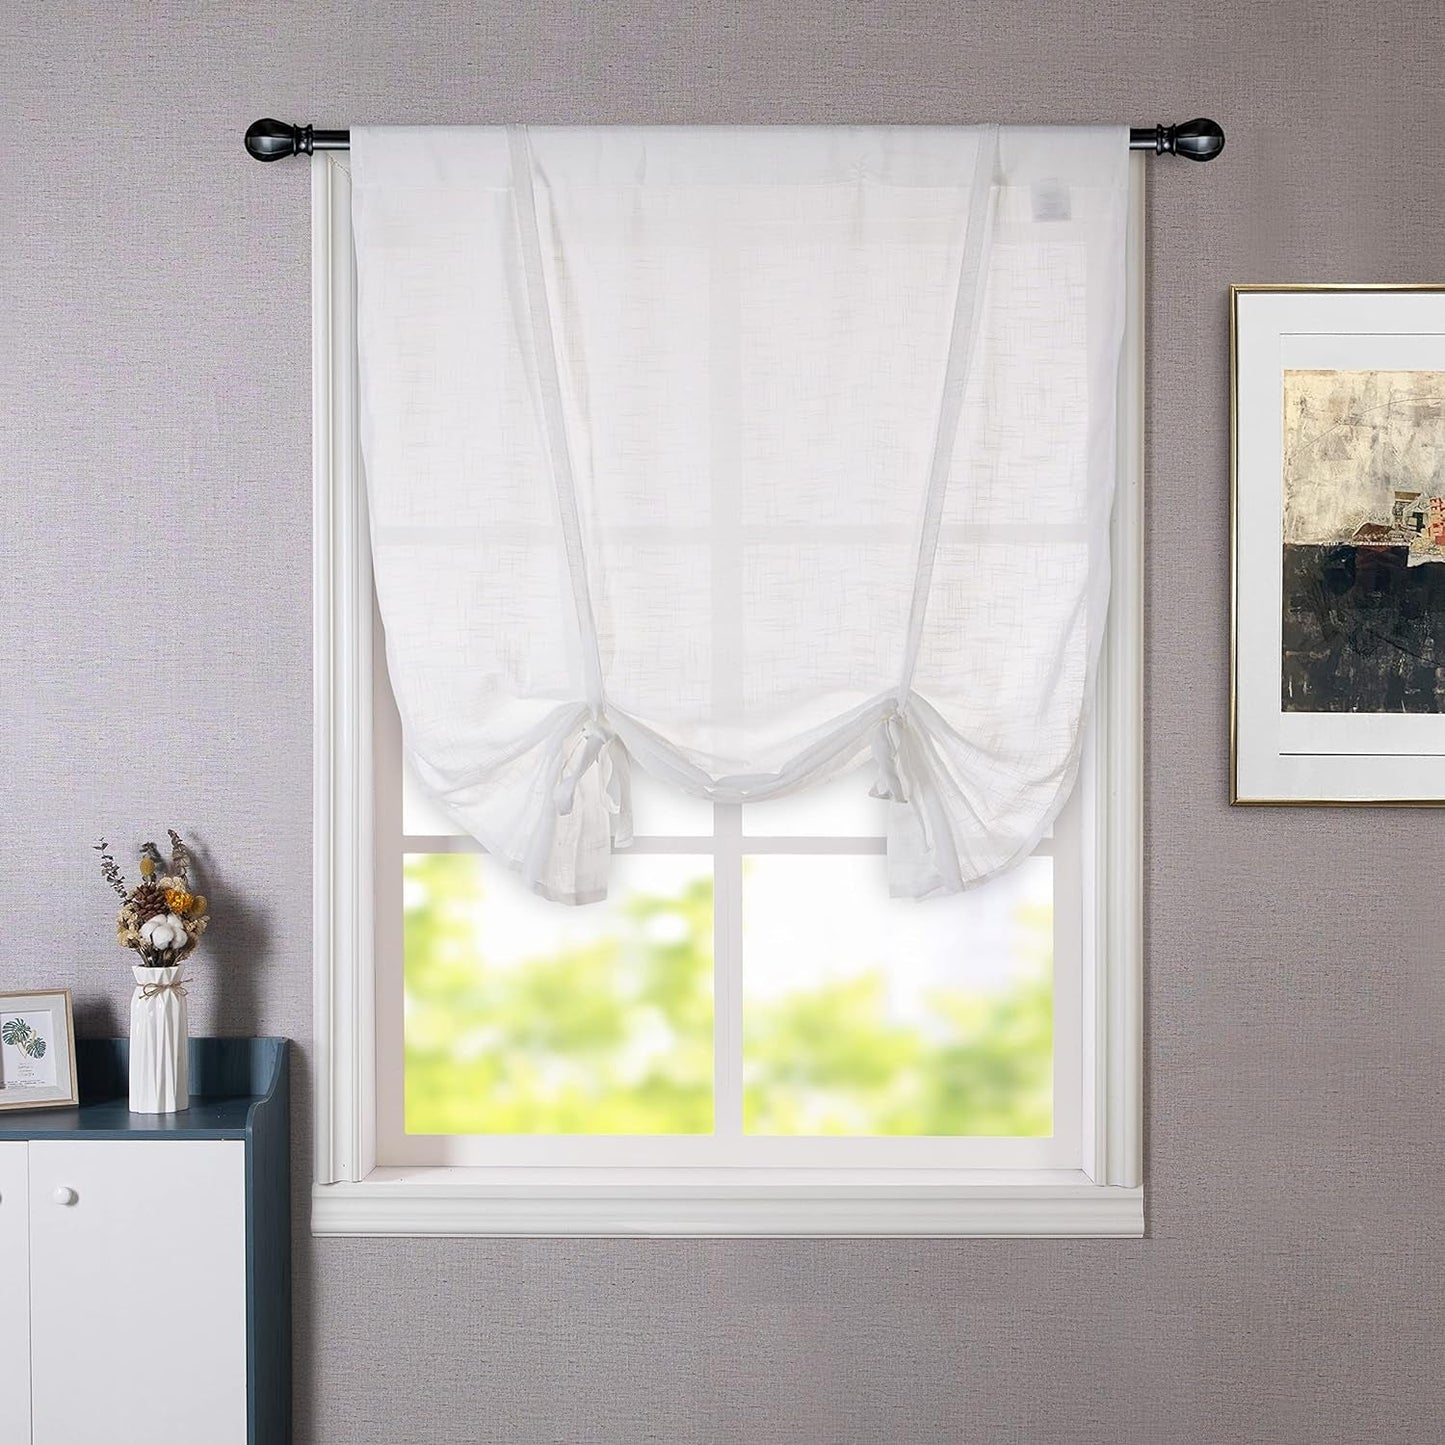 Driftaway Solid Color Linen Sheer Voile Tie up Decorative Slub Sheer Linen Curtains Adjustable Balloon Rod Pocket Window Curtains for Small Window 25 Inch by 47 Inch White